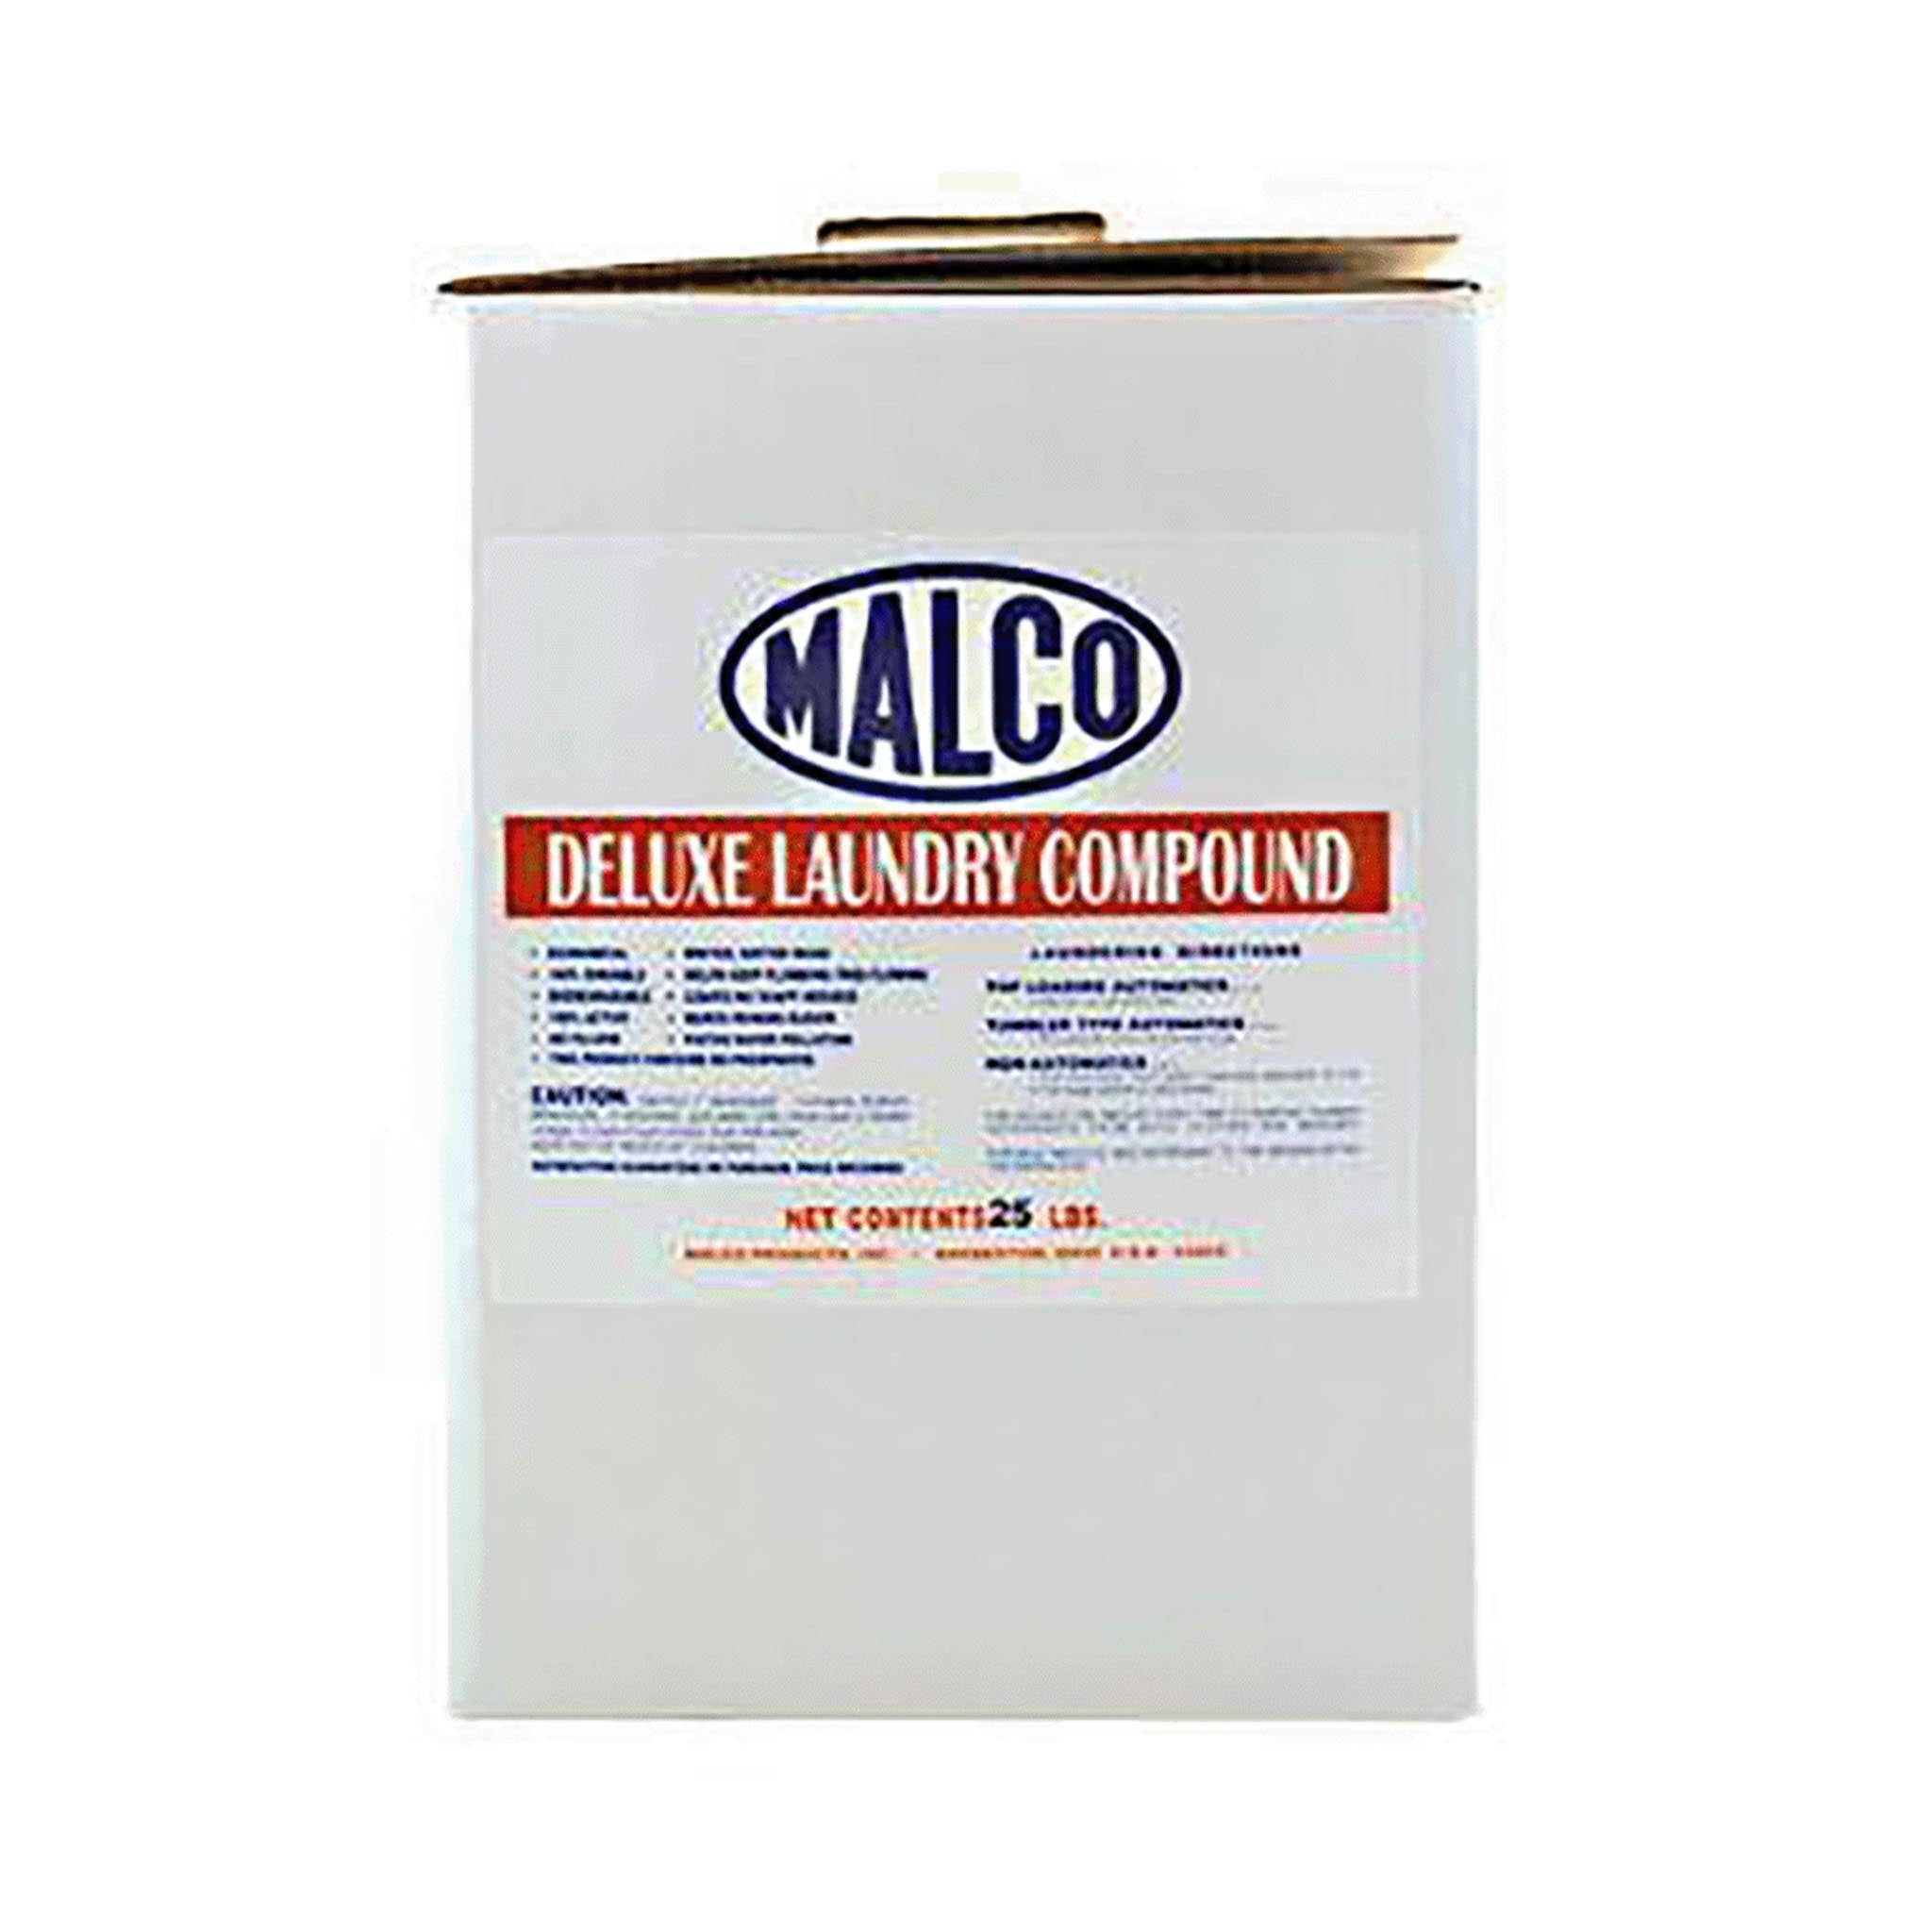 Malco Automotive DIST-ONLY-251026 Phosphate-free Laundry Detergent